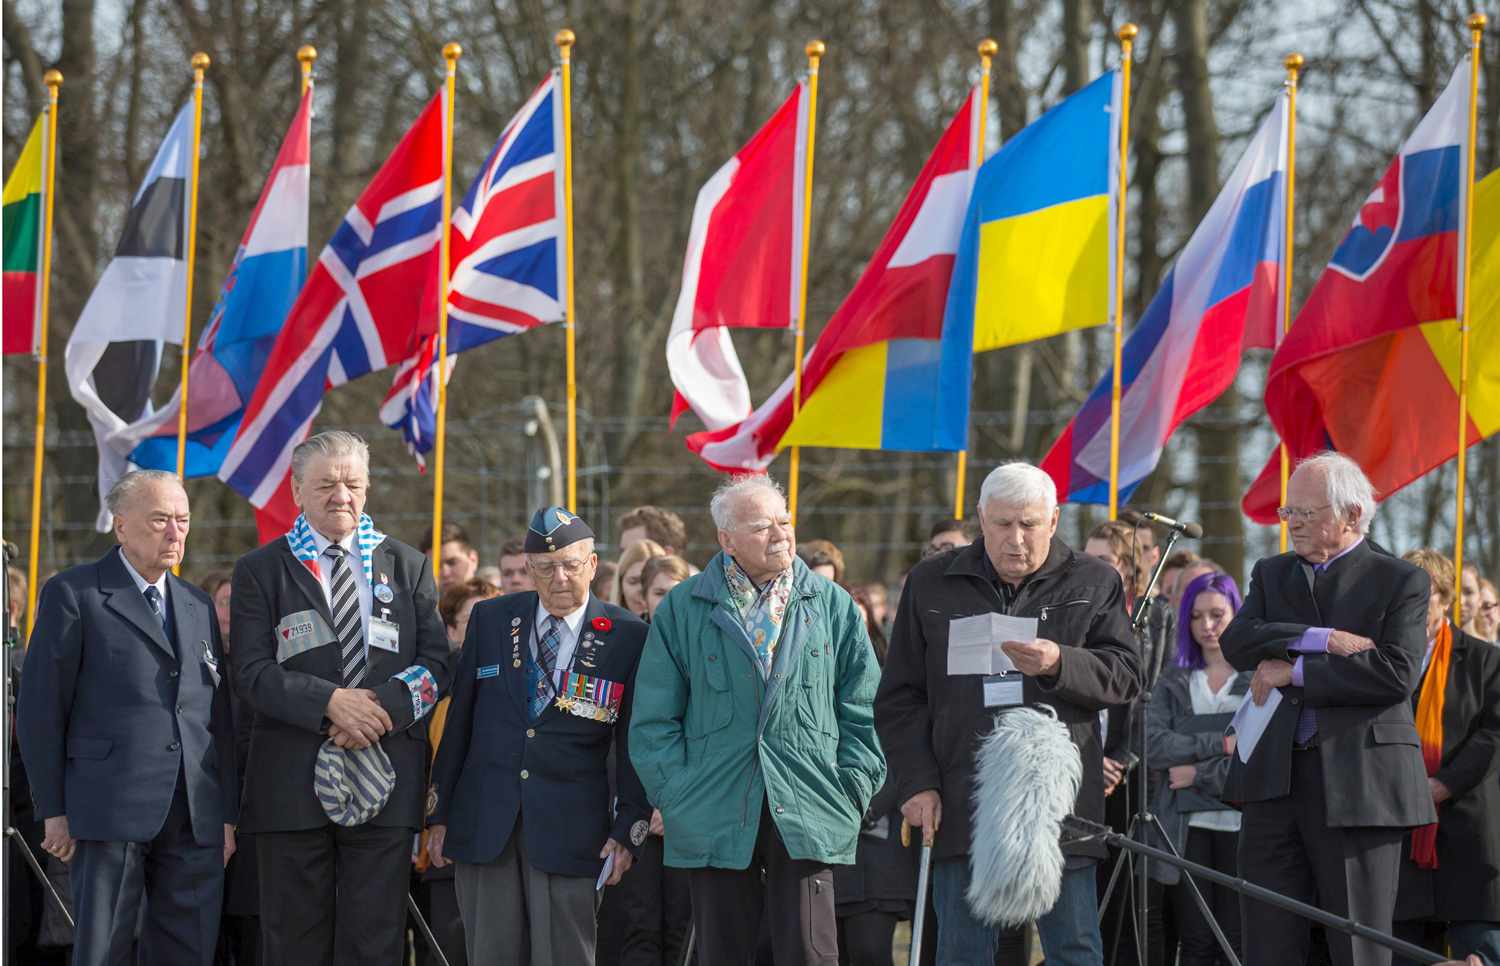 Ottomar Rothmann from Germany, Alojzy Maciak from Poland, Edward Carter Edwards from Canada, Pavel Kohn from the Czech Republic, Caston Viens from France and Boris Romantschenko from the Ukraine renew on April 12, 2015 in the Buchenwald concentration camp memorial